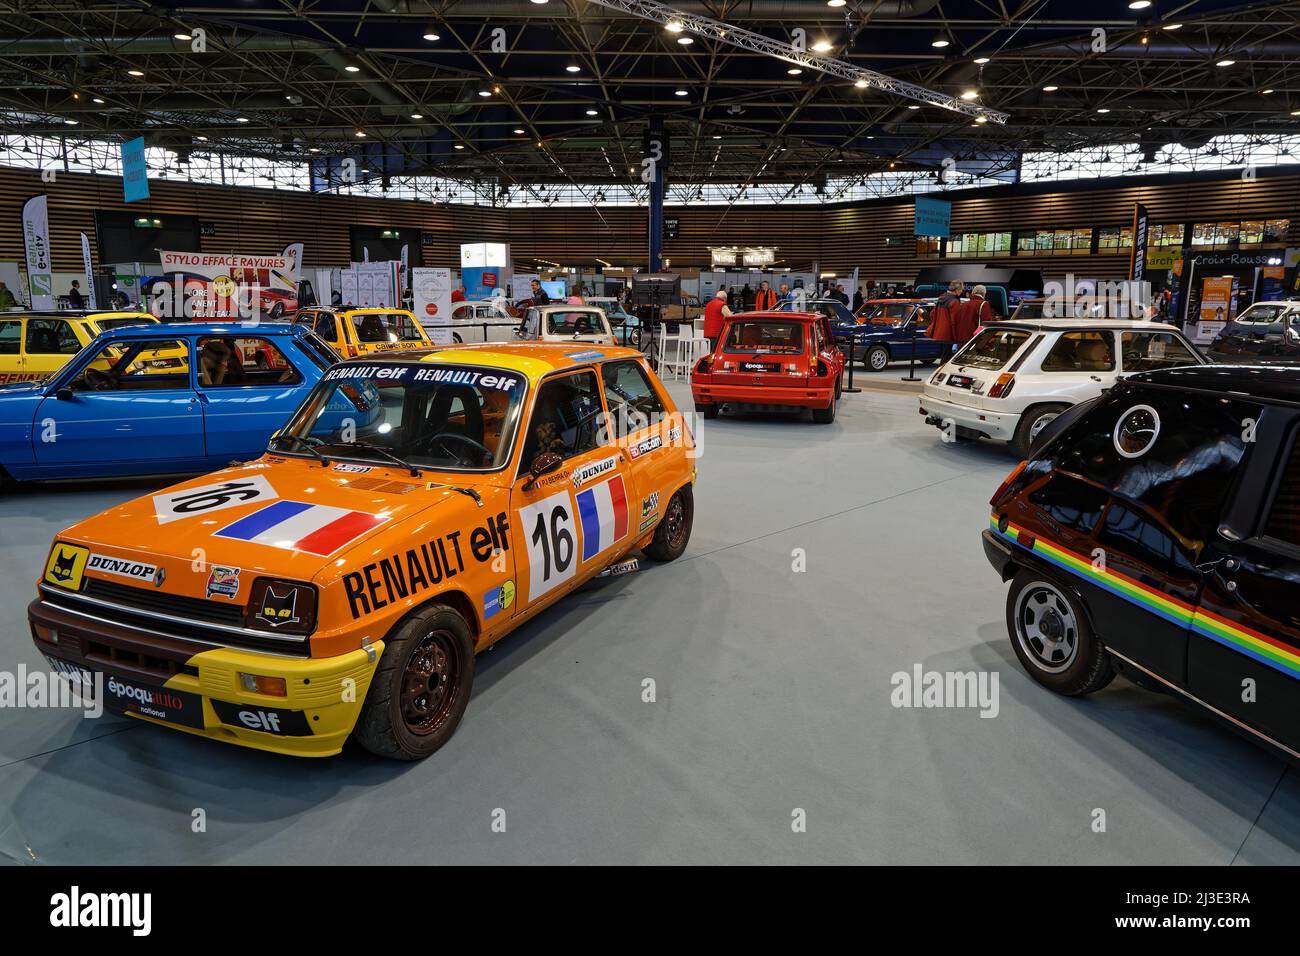 LYON, FRANCE, April 7, 2022 : The Lyon Motor Show is held at Eurexpo. Renault 5, the most sporty city car celebrates its 50th anniversary at the show. Stock Photo